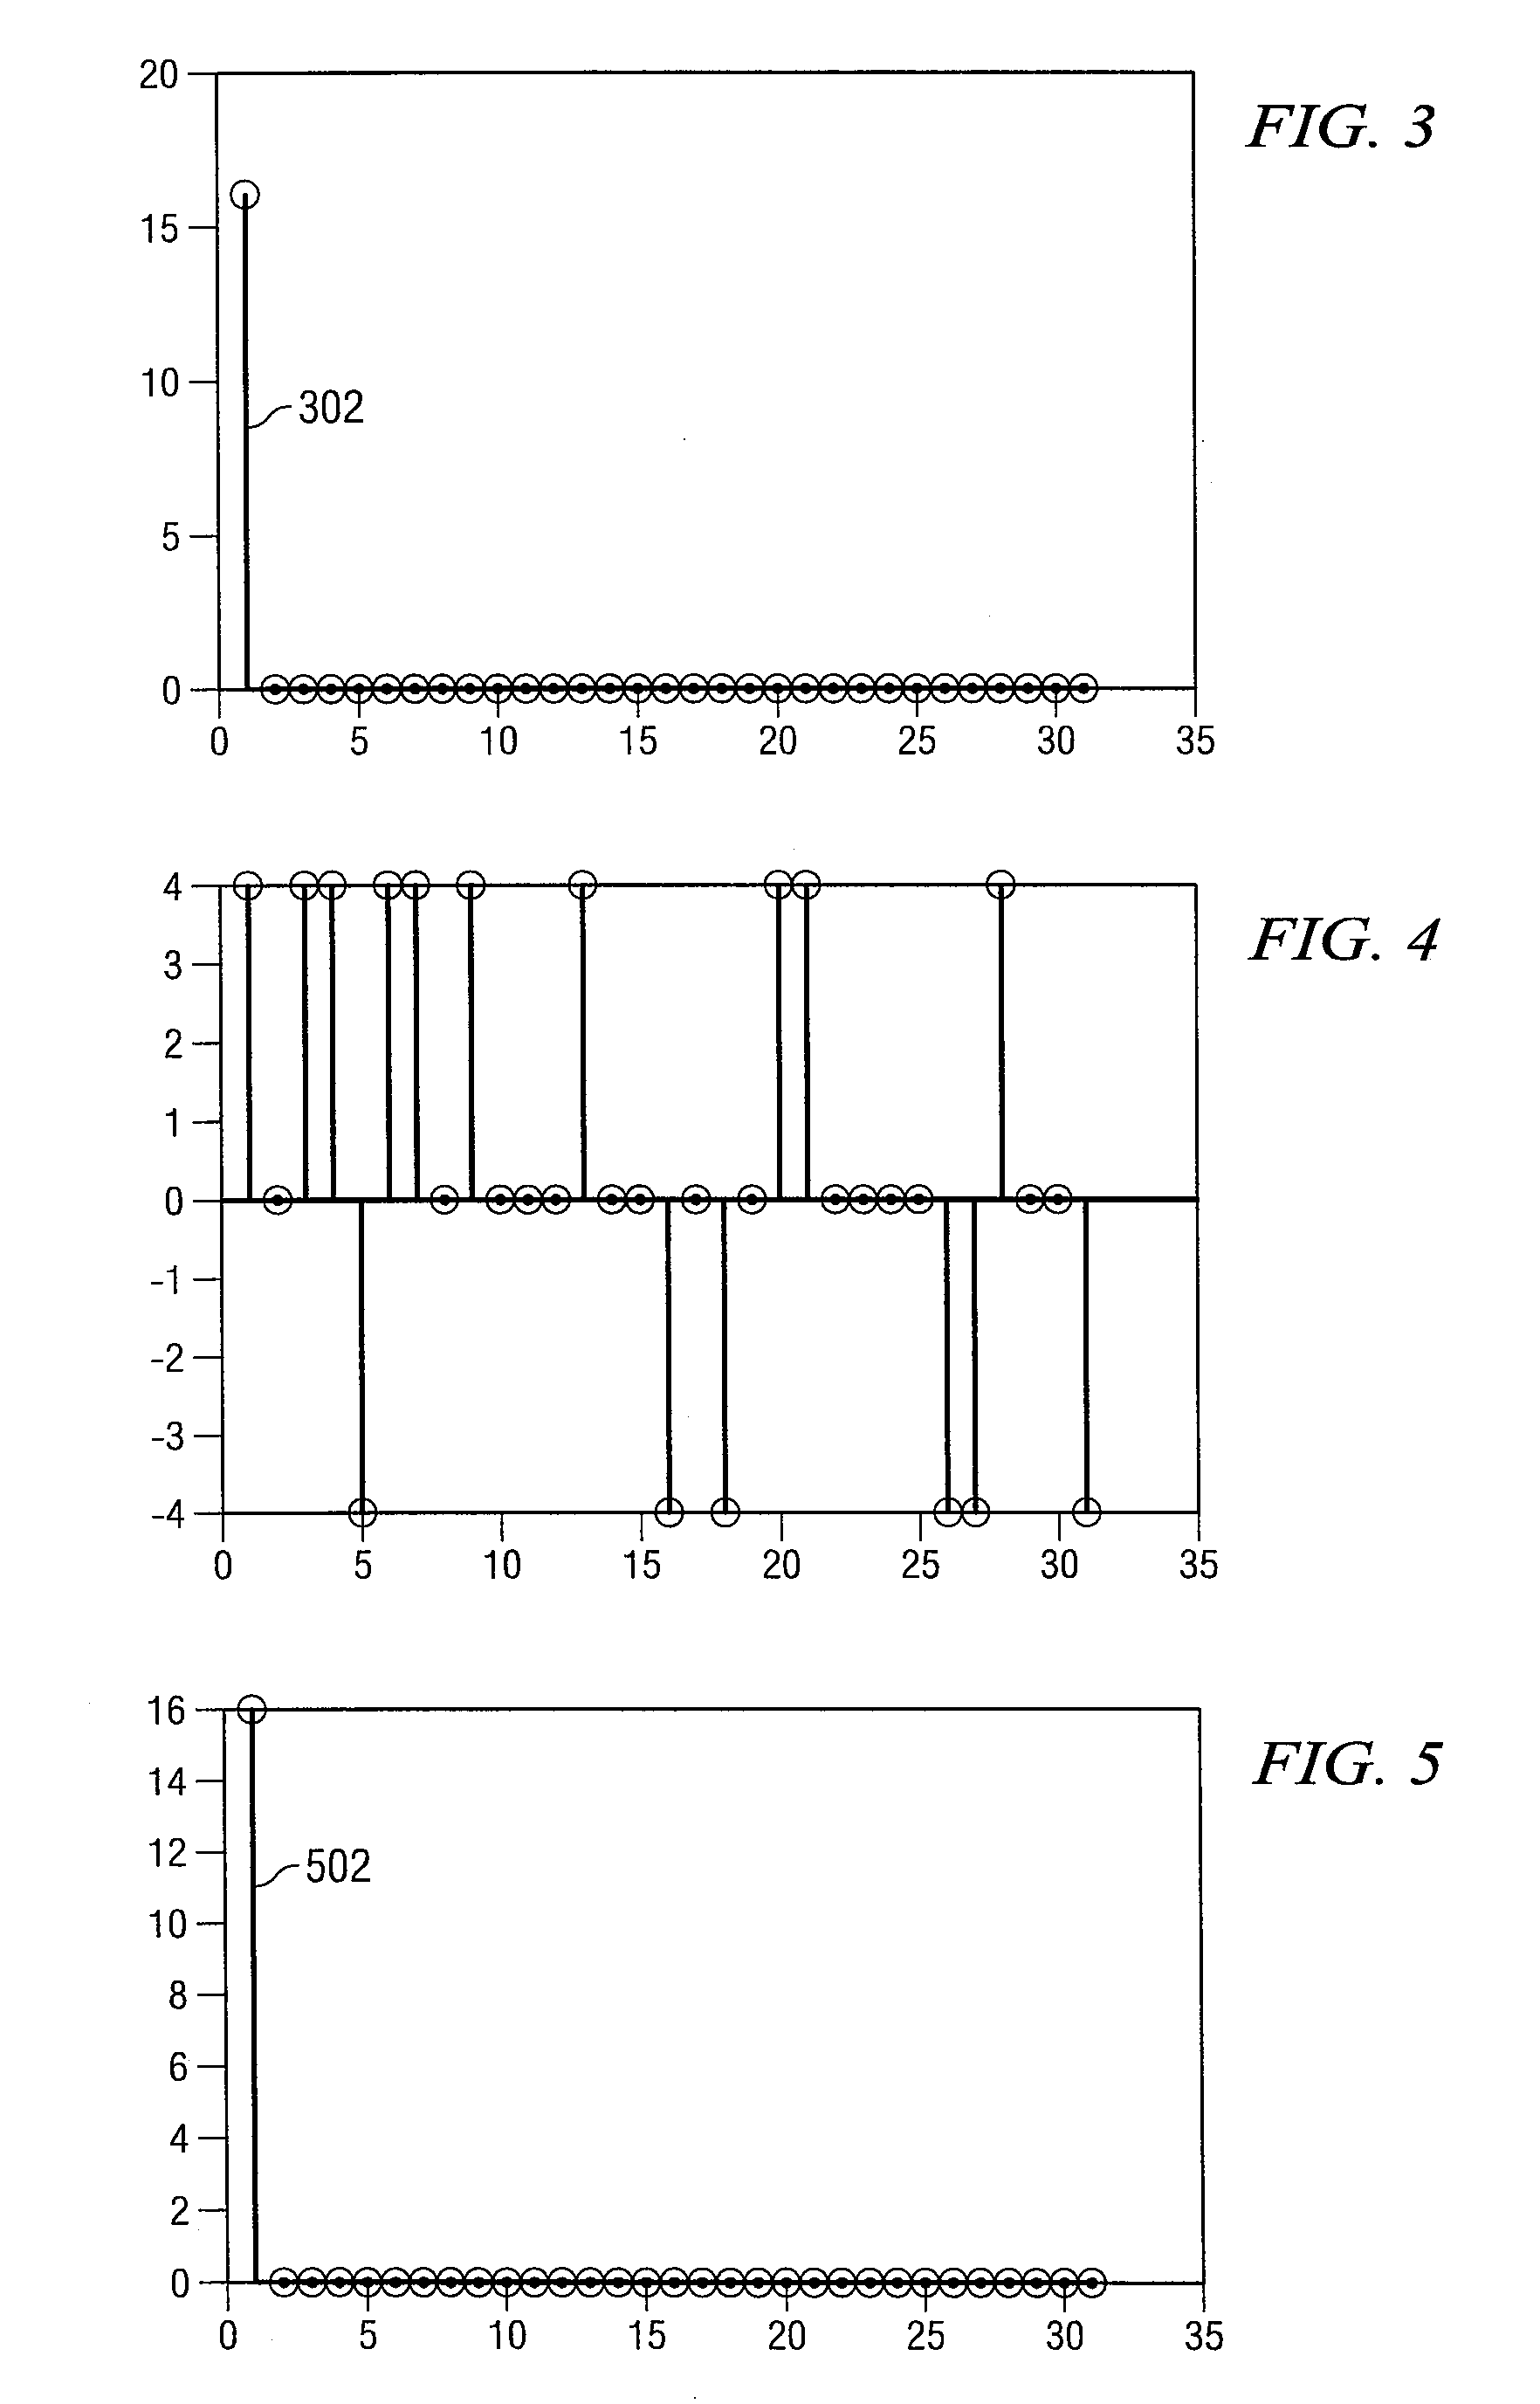 Systems and method for generating a common preamble for use in a wireless communication system